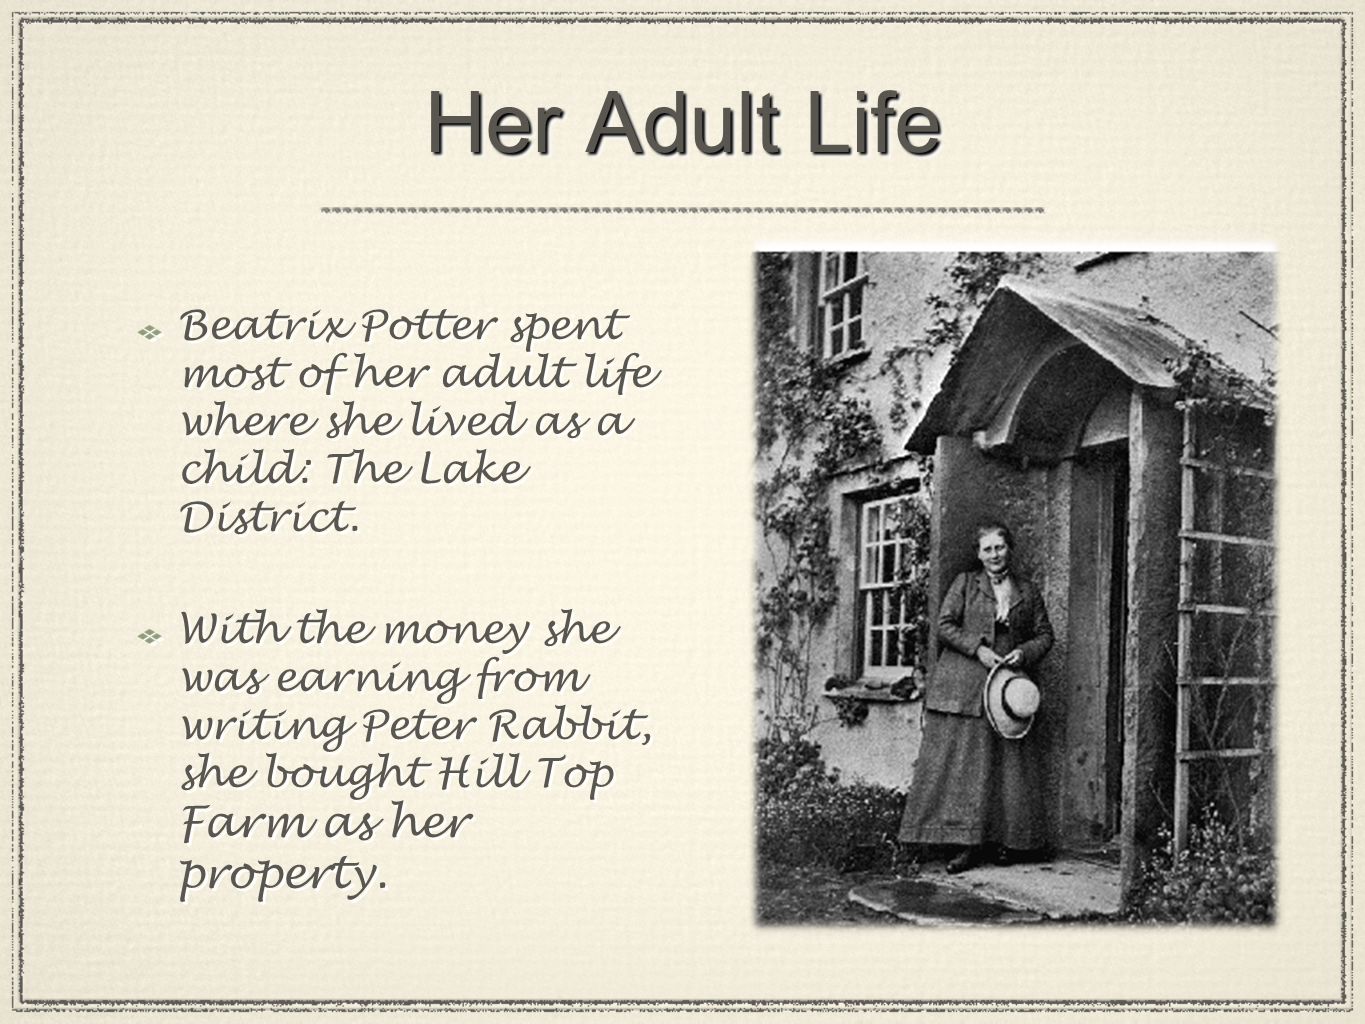 Her Adult Life Beatrix Potter spent most of her adult life where she lived as a child: The Lake District.